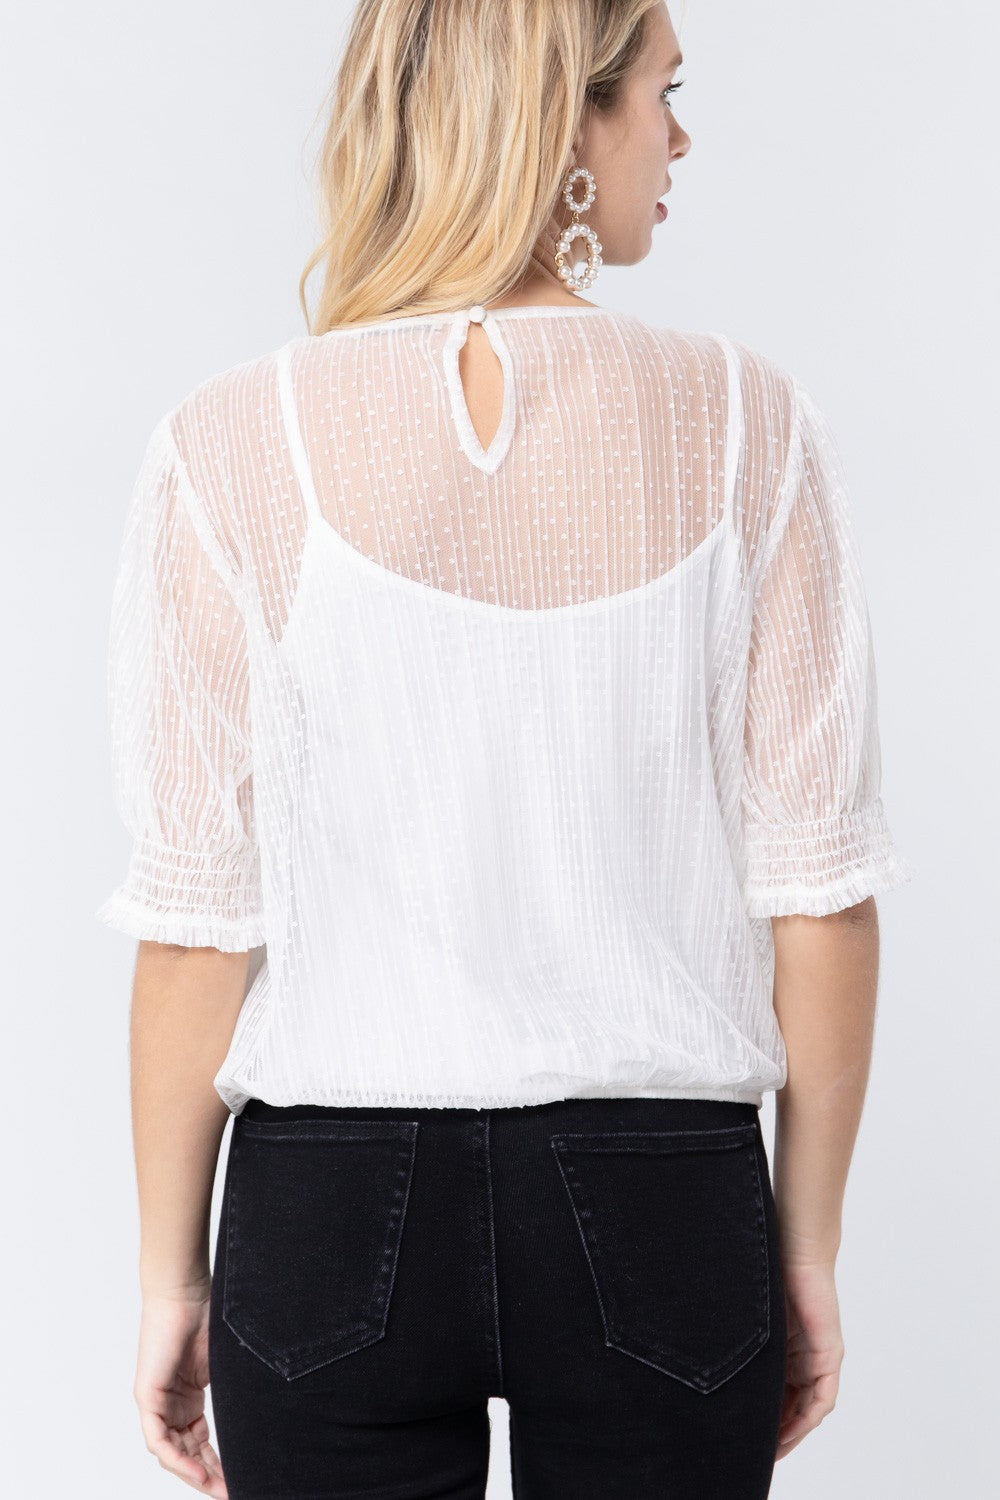 Elbow Sleeve Dot Mesh Top with Inner Cami